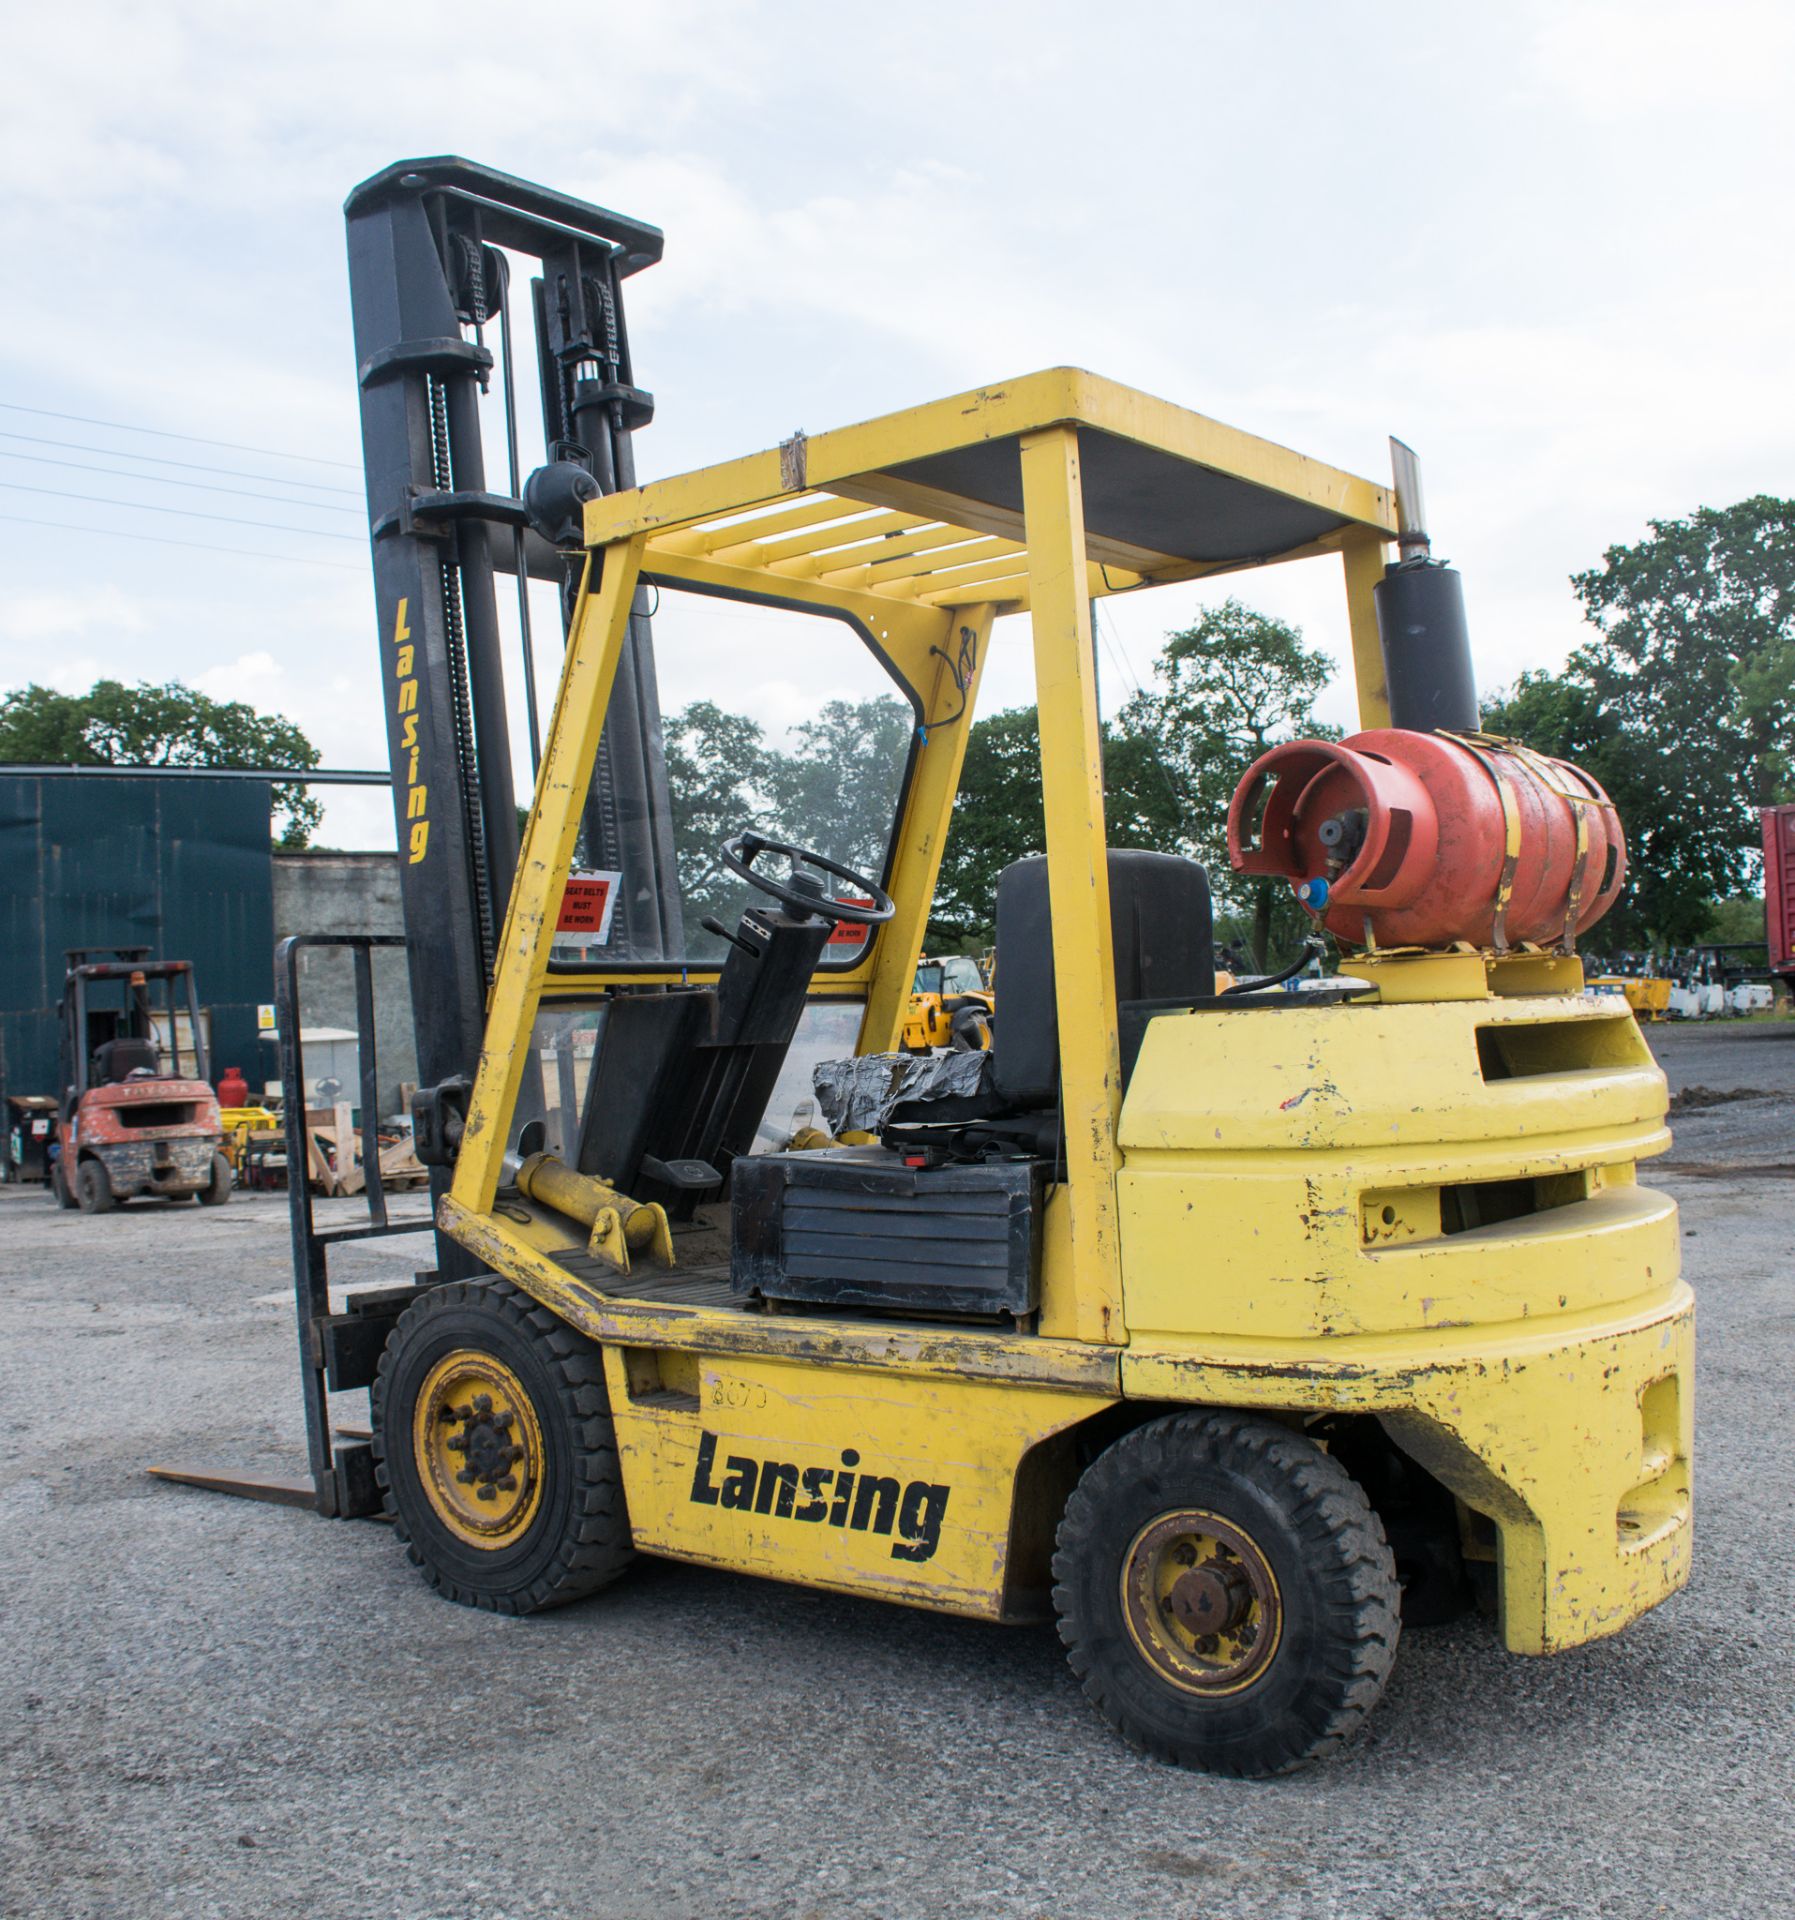 Lansing 7/2.5 2.5 tonne gas powered fork lift truck S/N: 36725 Recorded Hours: 219 - Image 2 of 12